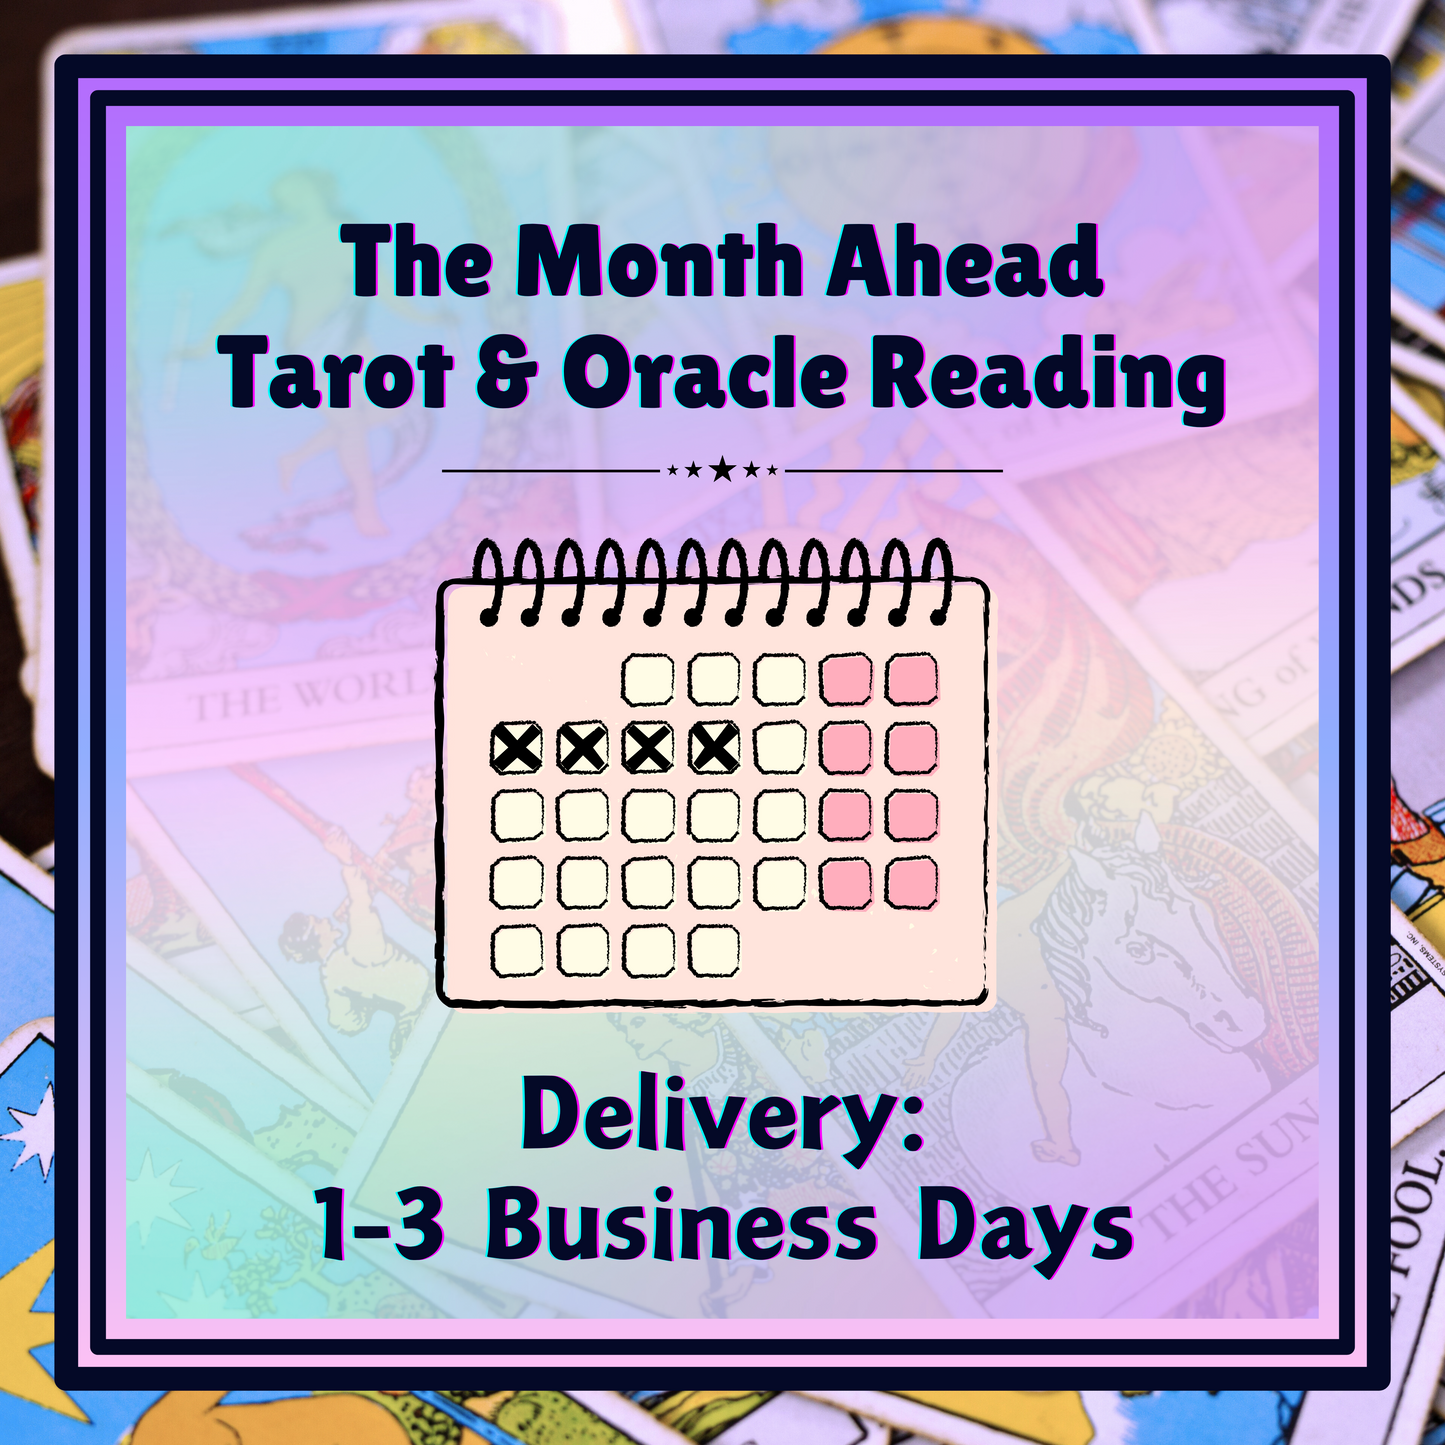 The Month Ahead Tarot & Oracle Reading